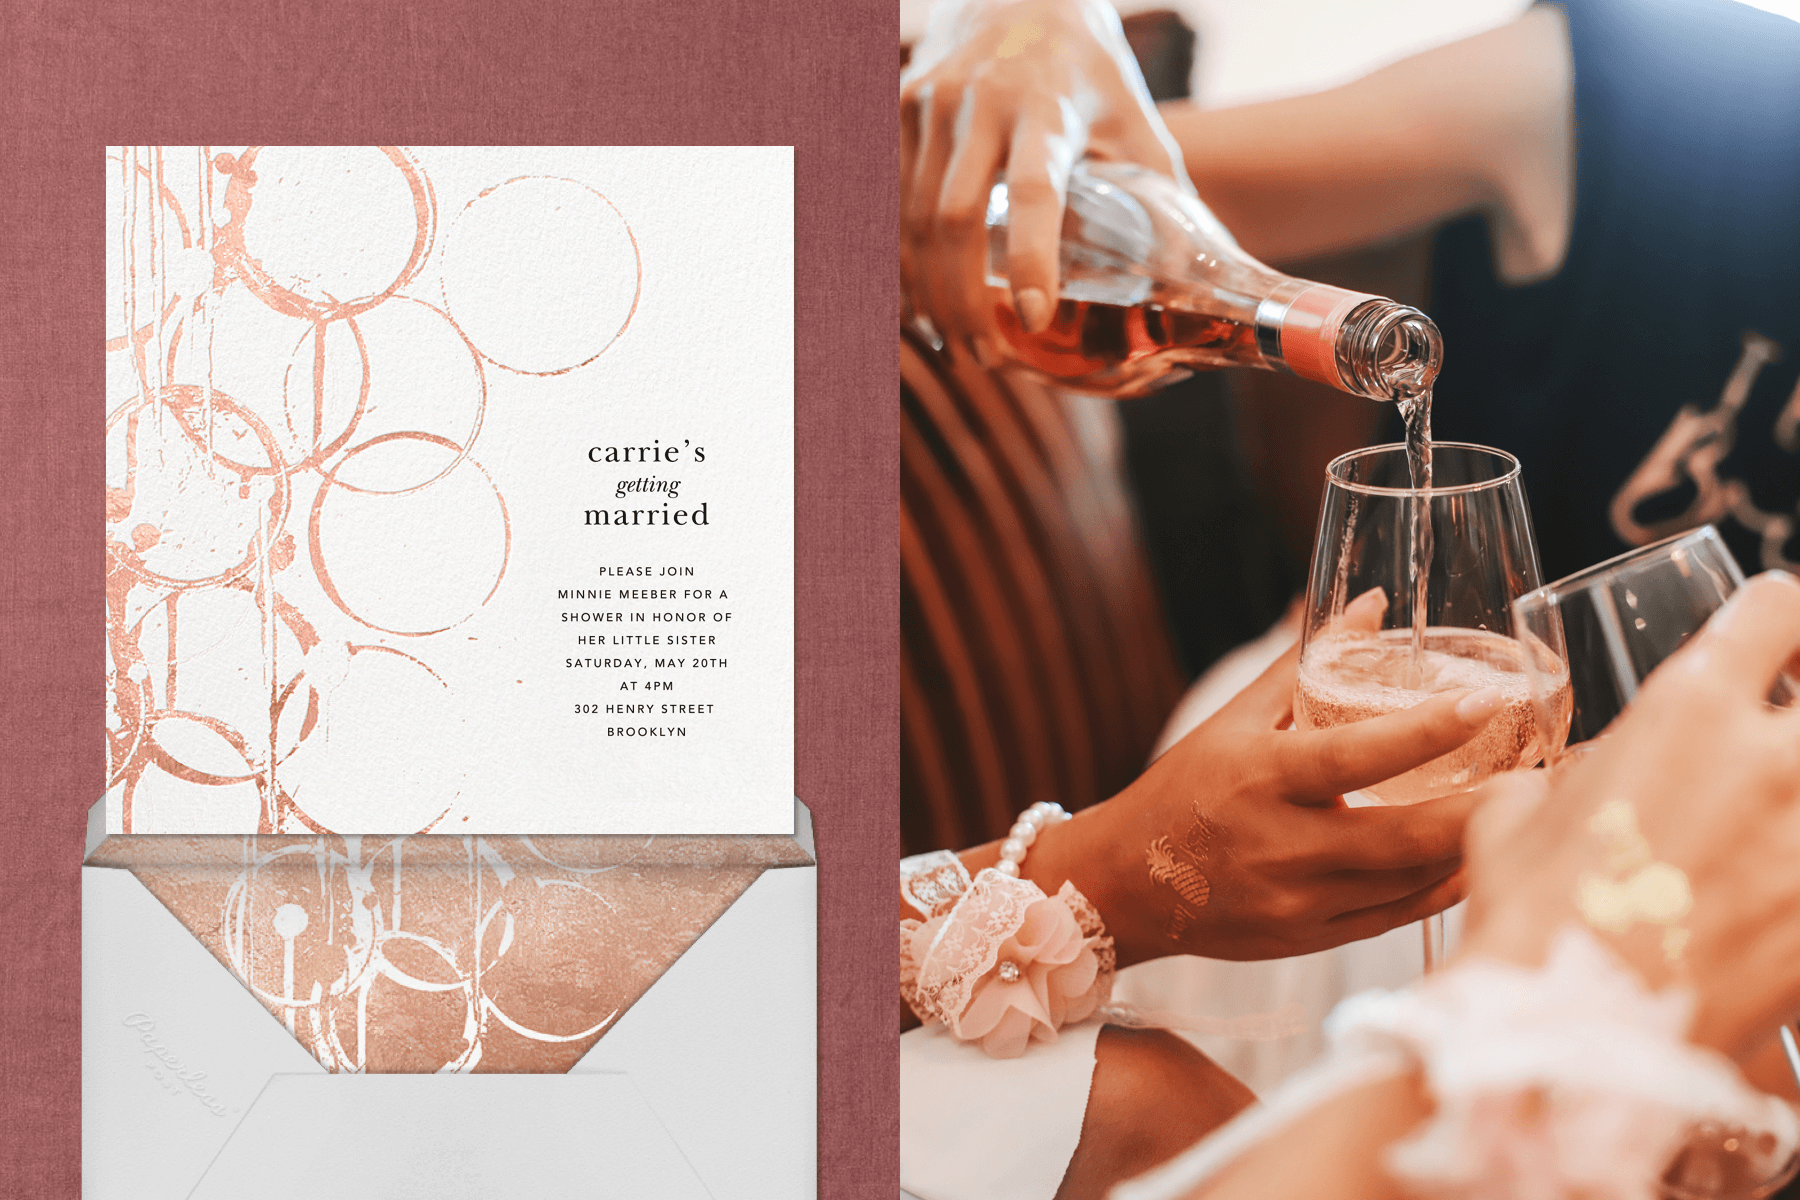 left: A bridal shower invitation with abstract ring shapes. Right: Rosé wine is poured into a wine glass.